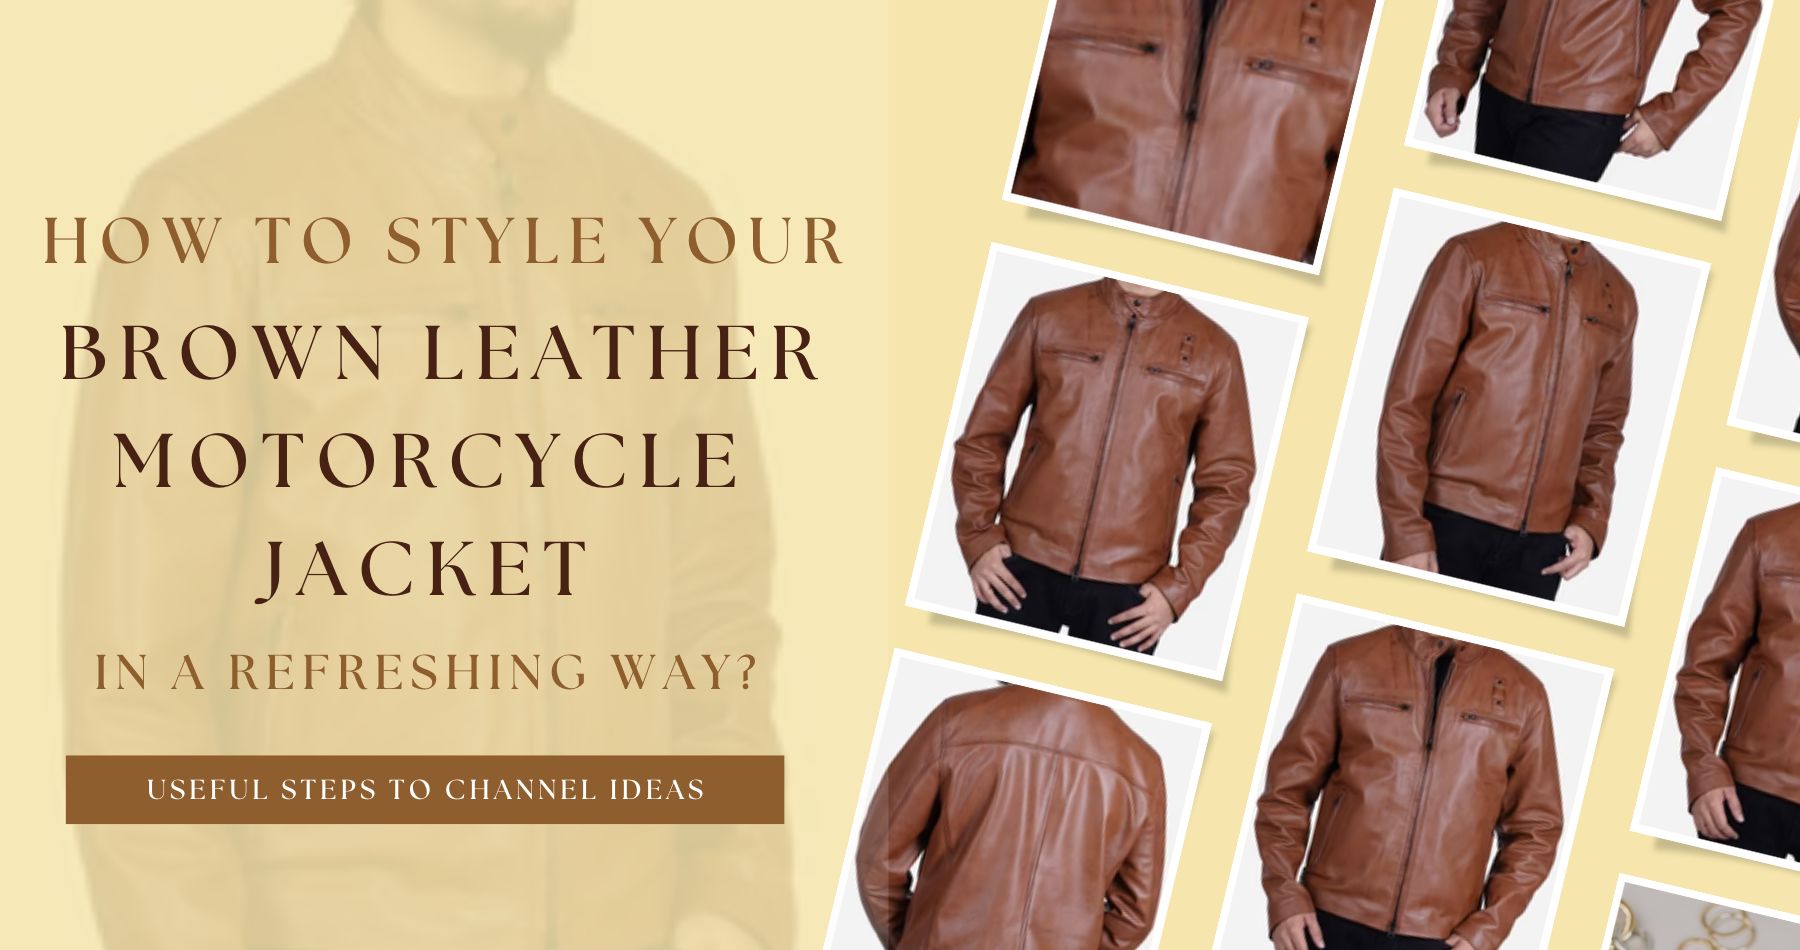 How to Style Your Brown Leather Motorcycle Jacket